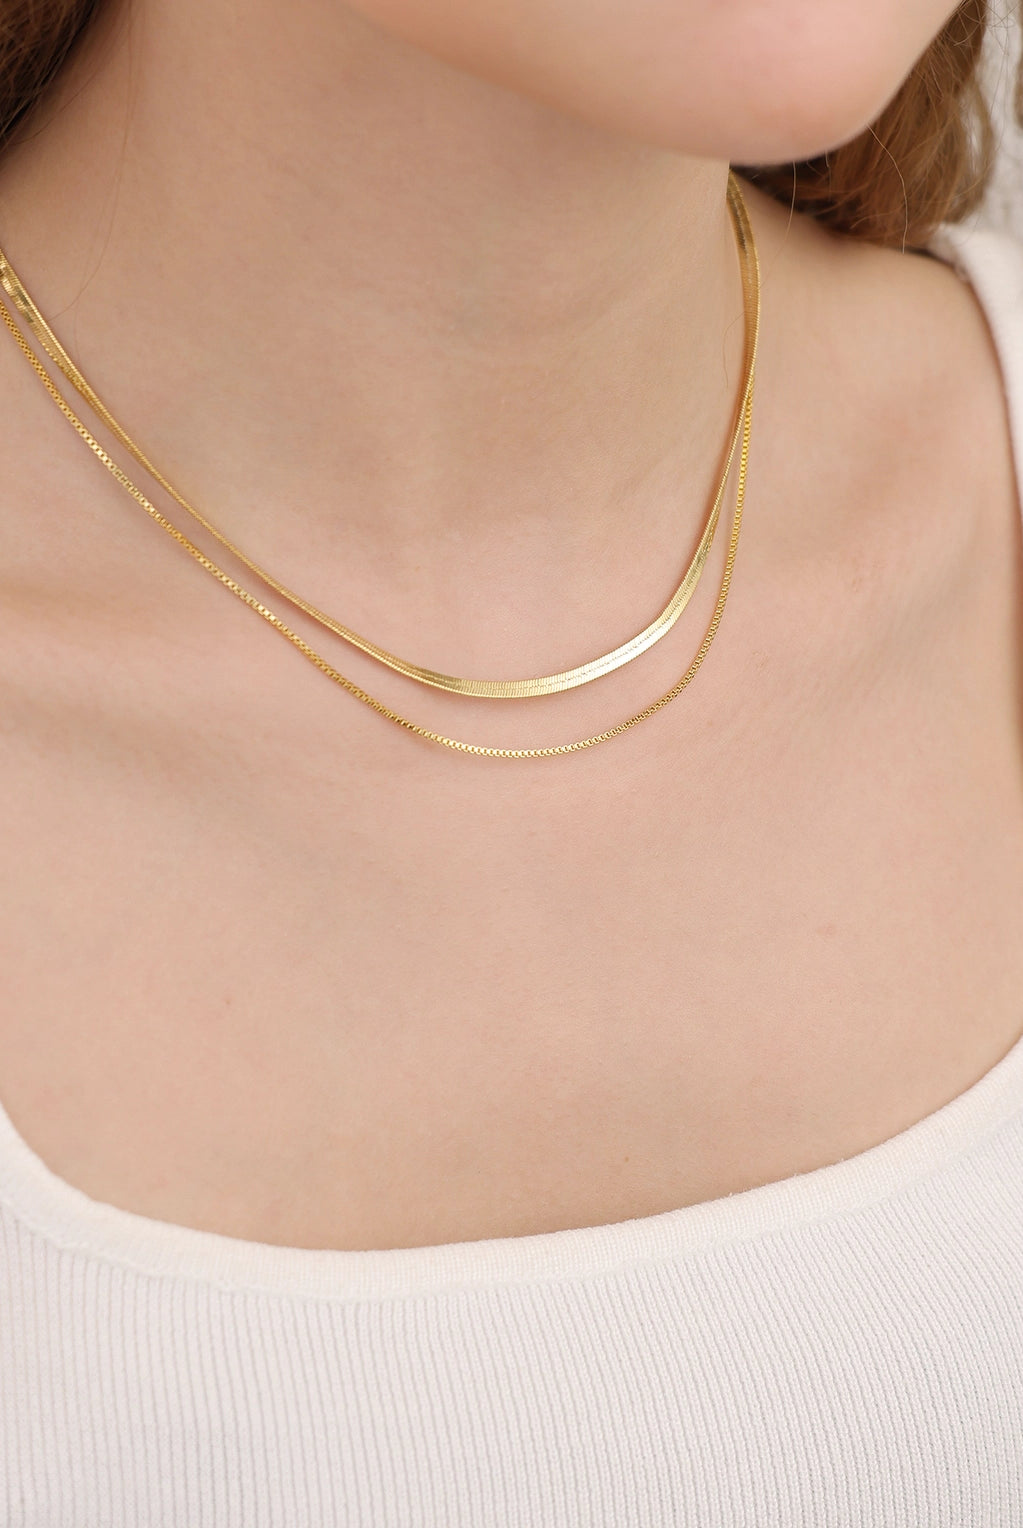 ethicaldoublechainnecklace